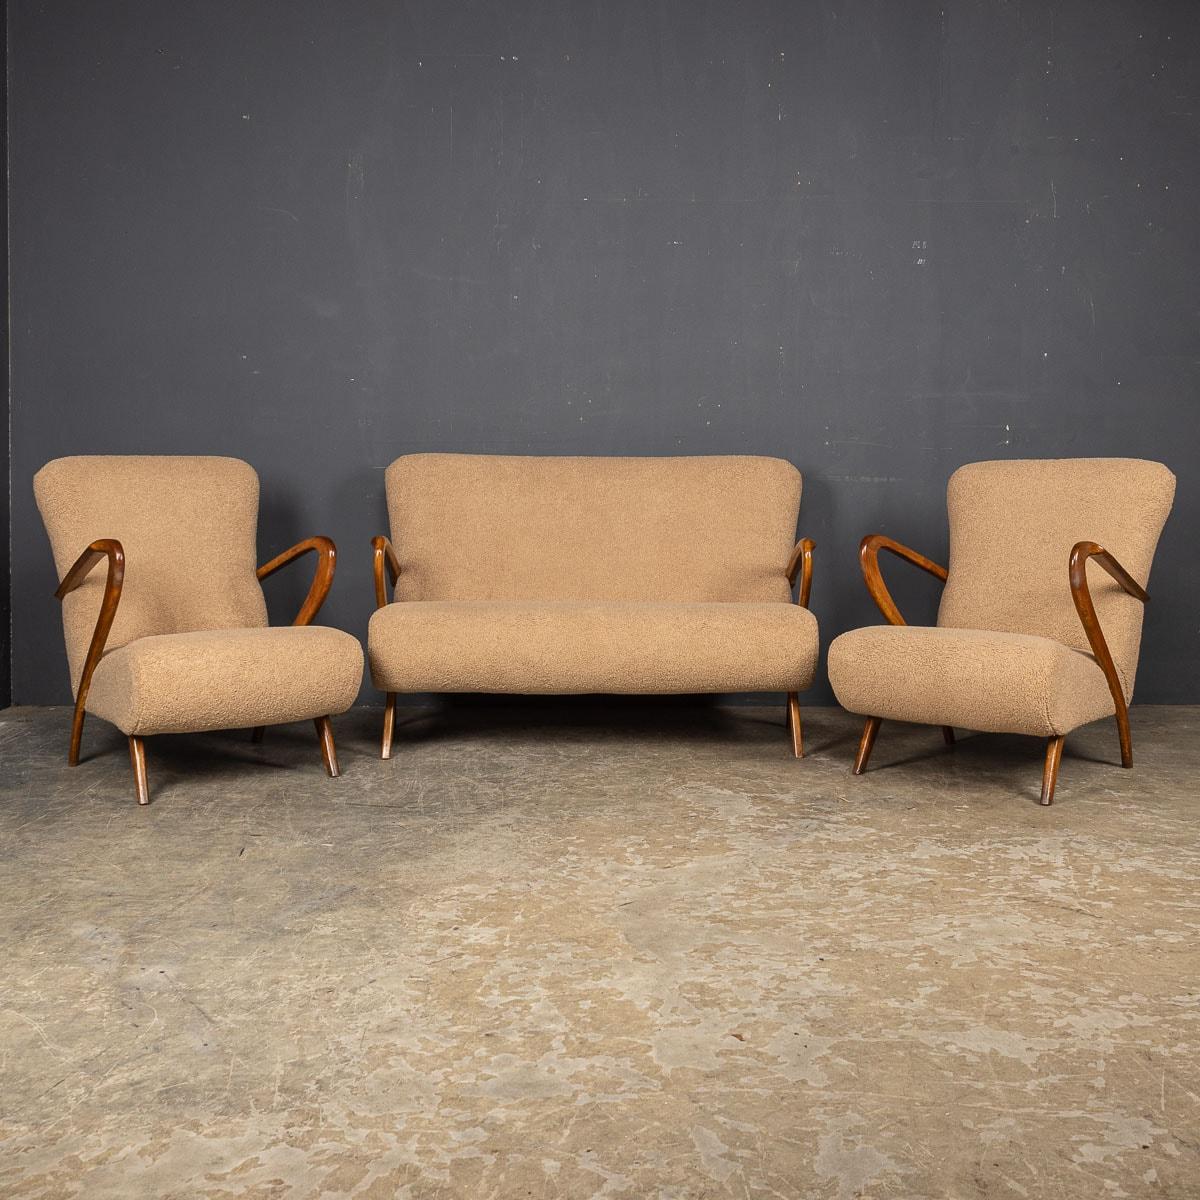 A beautiful set of mid 20th Century Italian armchairs and sofa by Paulo Buffa. These pieces showcase impeccable quality, boasting a sumptuous finish in soft Italian boucle fabric. Their stately proportions and exceptional comfort make them stand